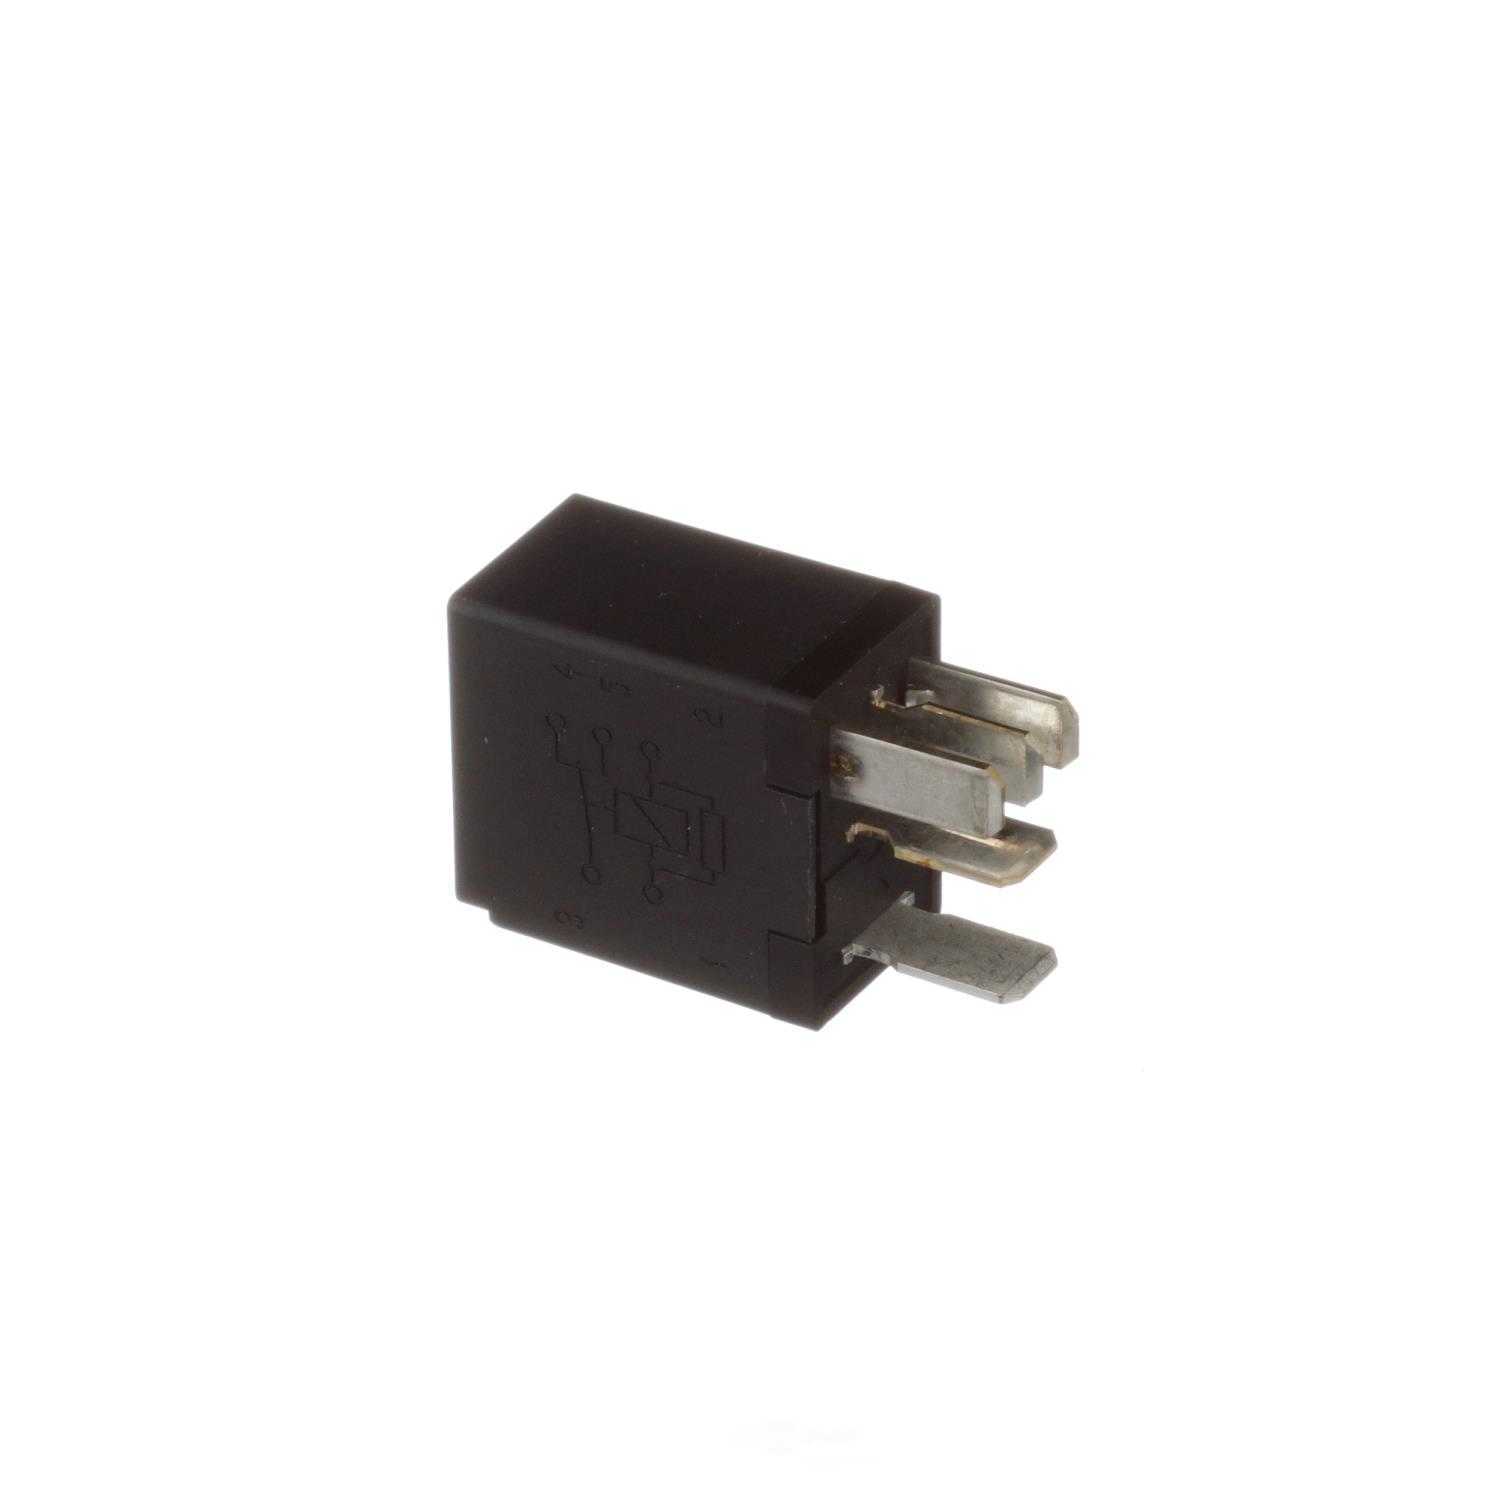 Standard Motor Products RY-577 Relay 